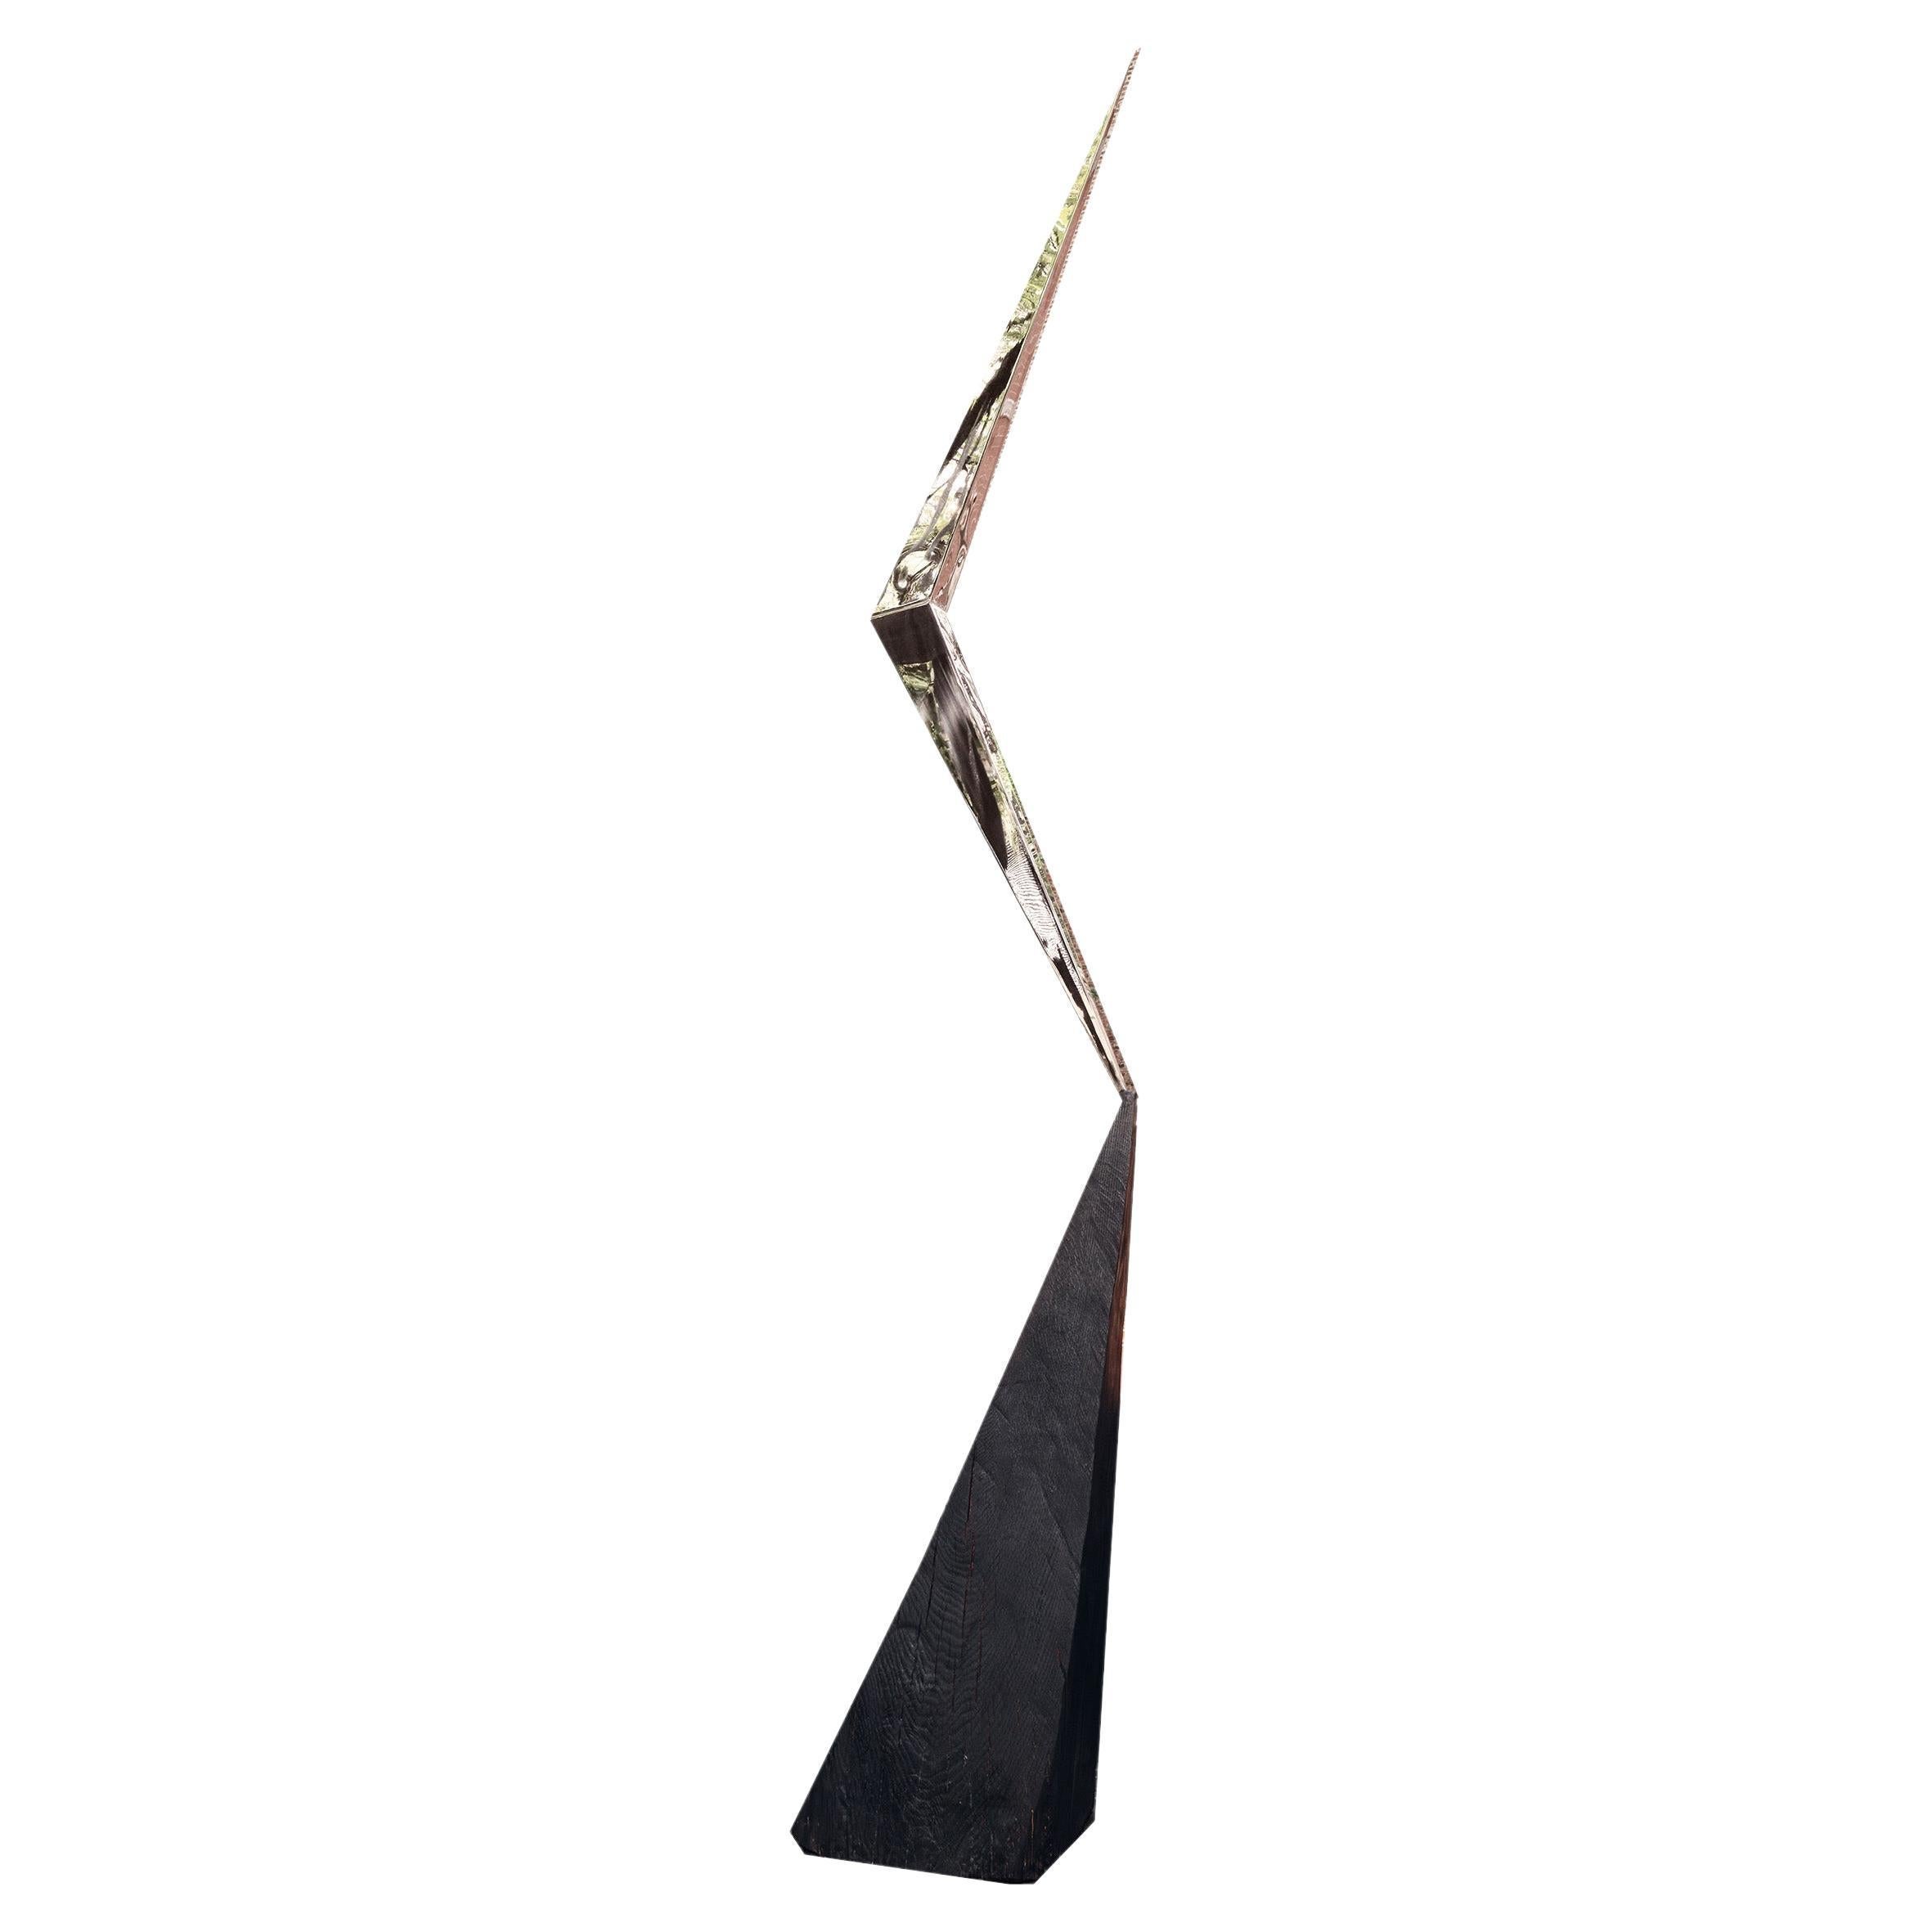 Petrichor Stainless Steel Sculpture by Sol Bailey Barker, REP by Tuleste Factory For Sale